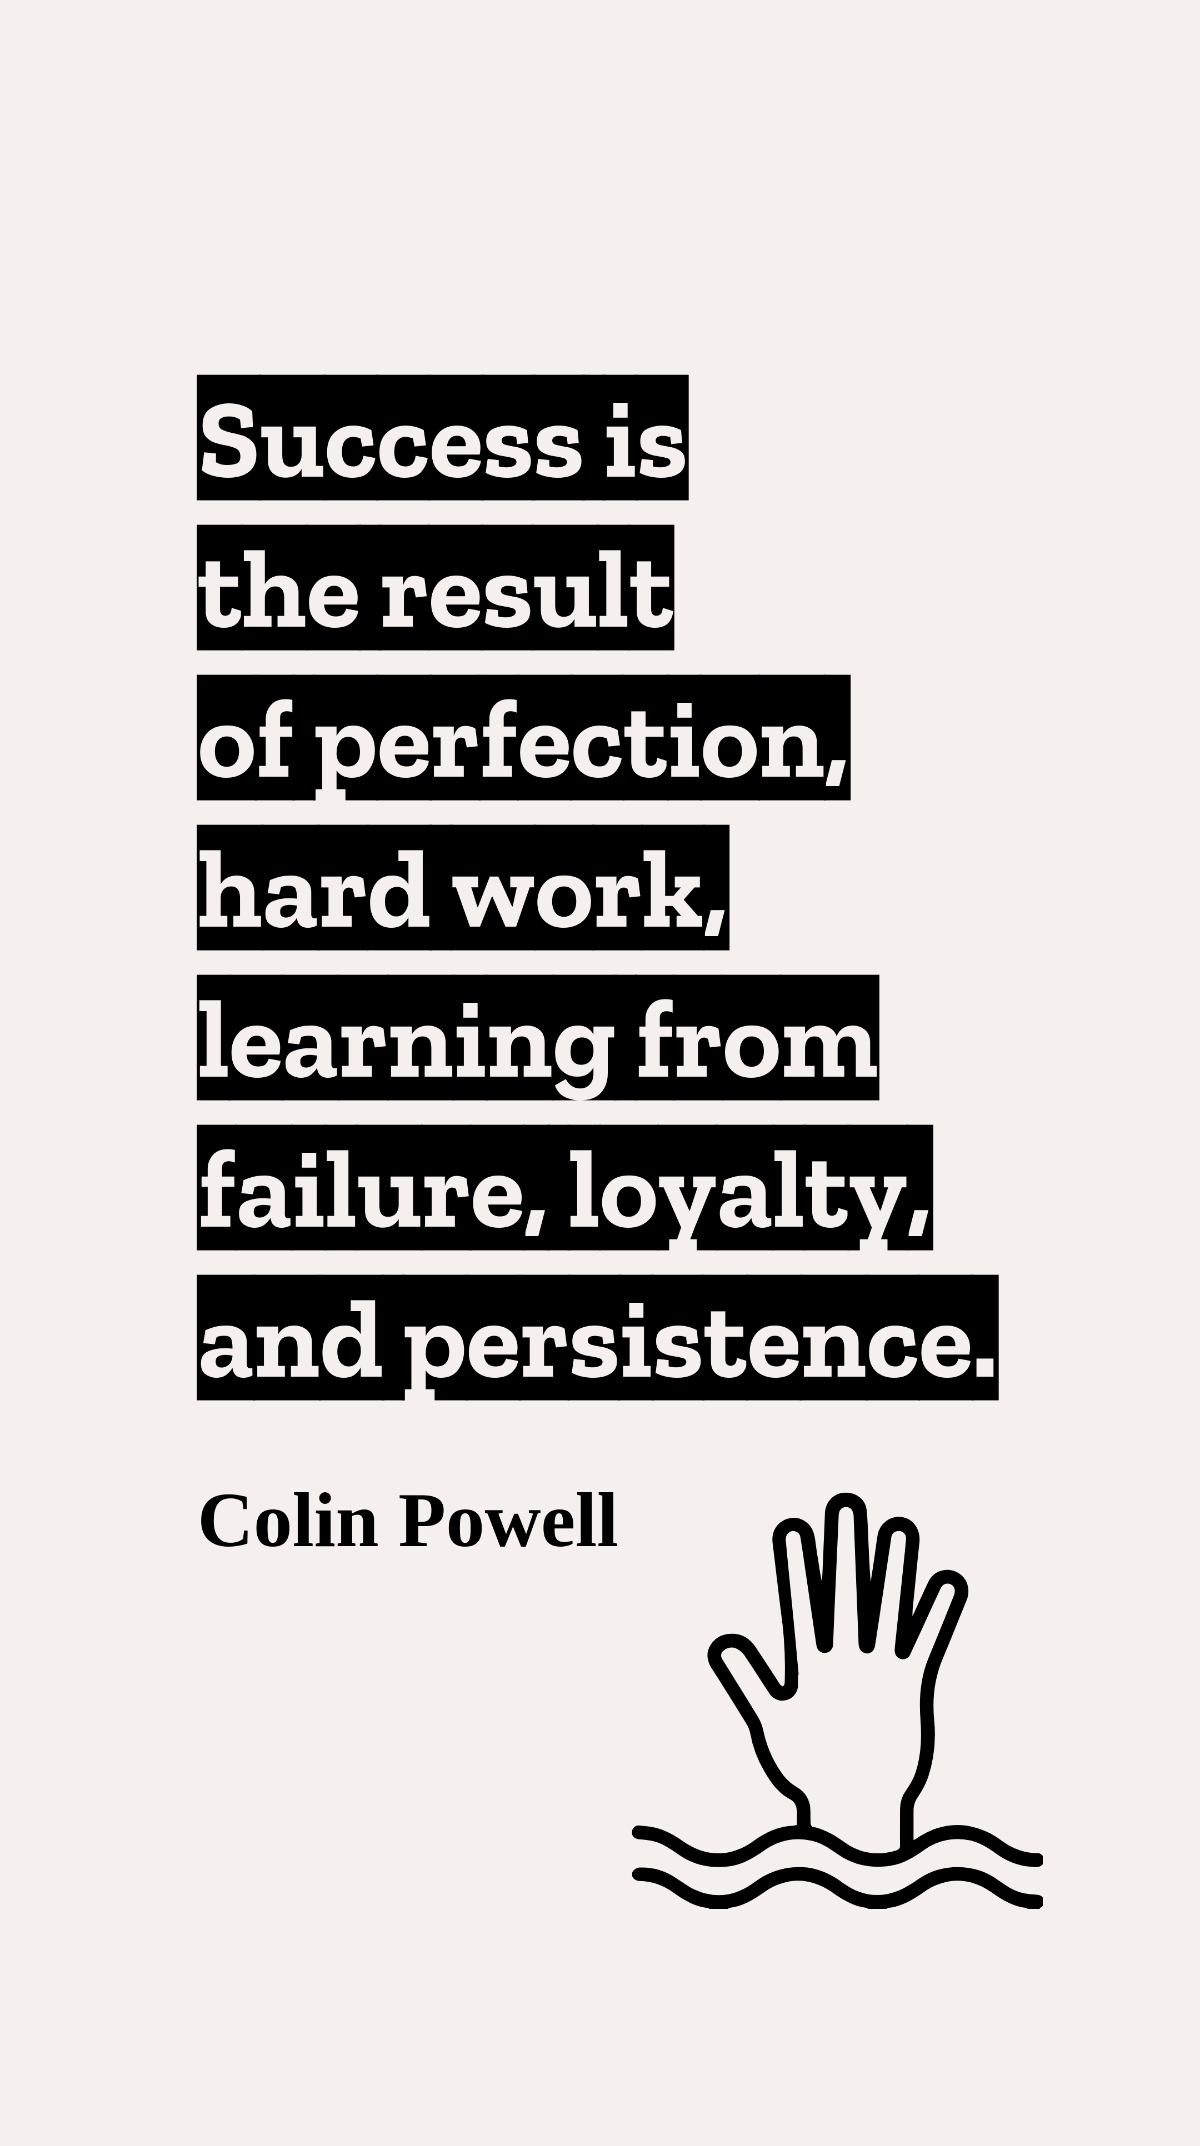 Colin Powell - Success is the result of perfection, hard work, learning from failure, loyalty, and persistence.